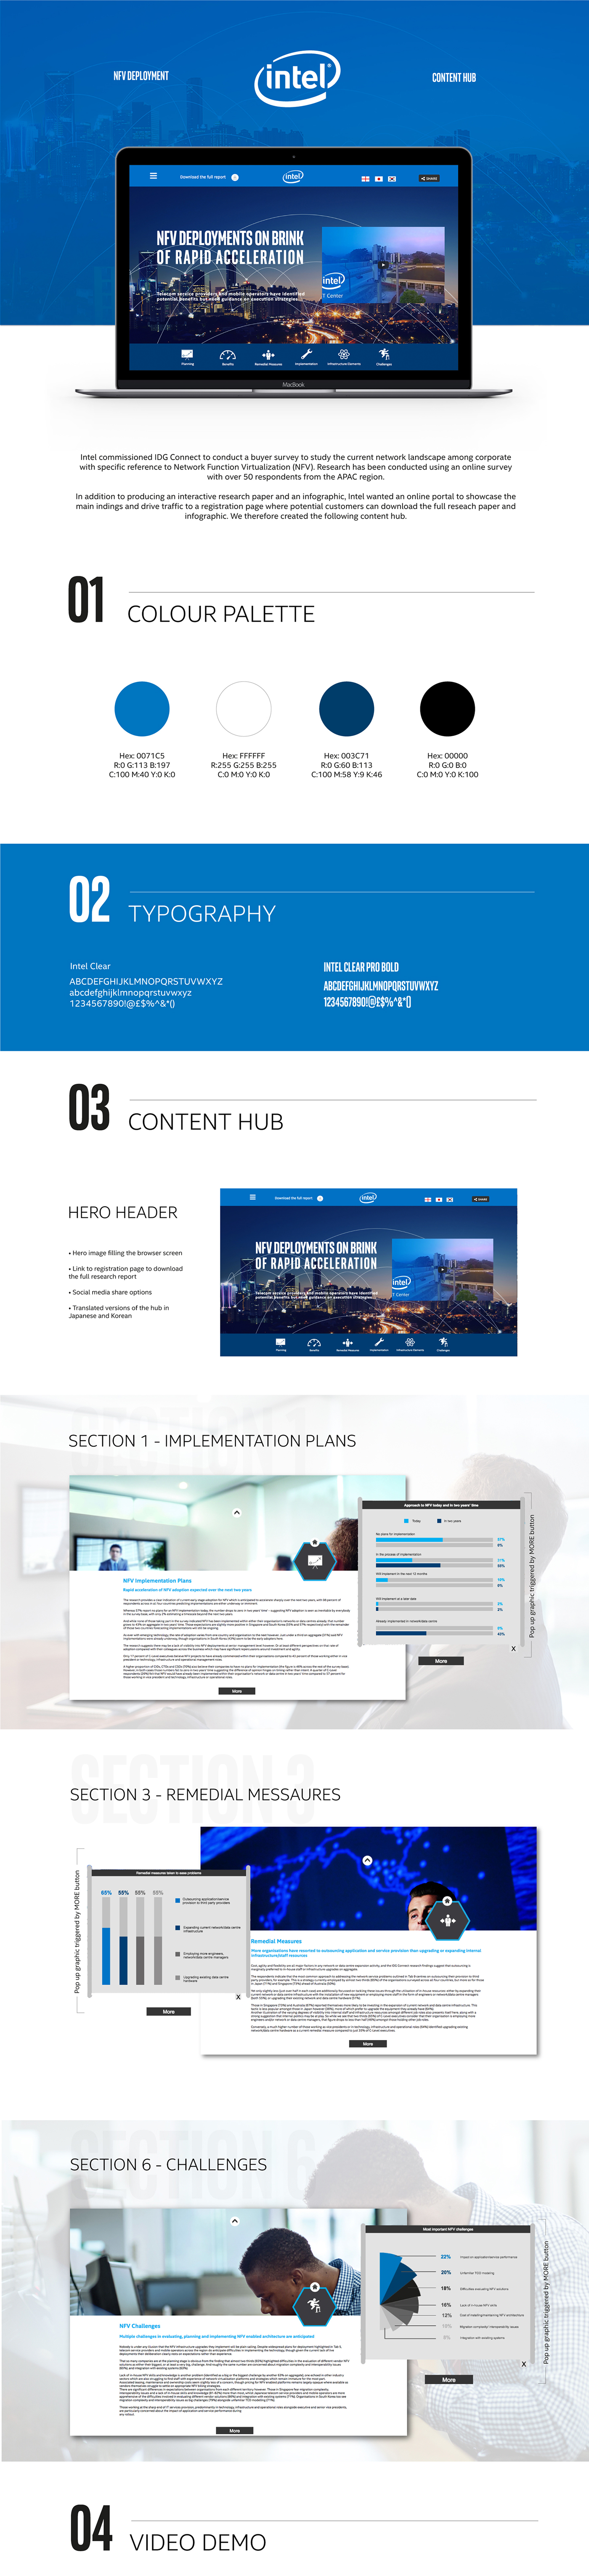 intel IDG Connect Technology Web Design  content hub Network function